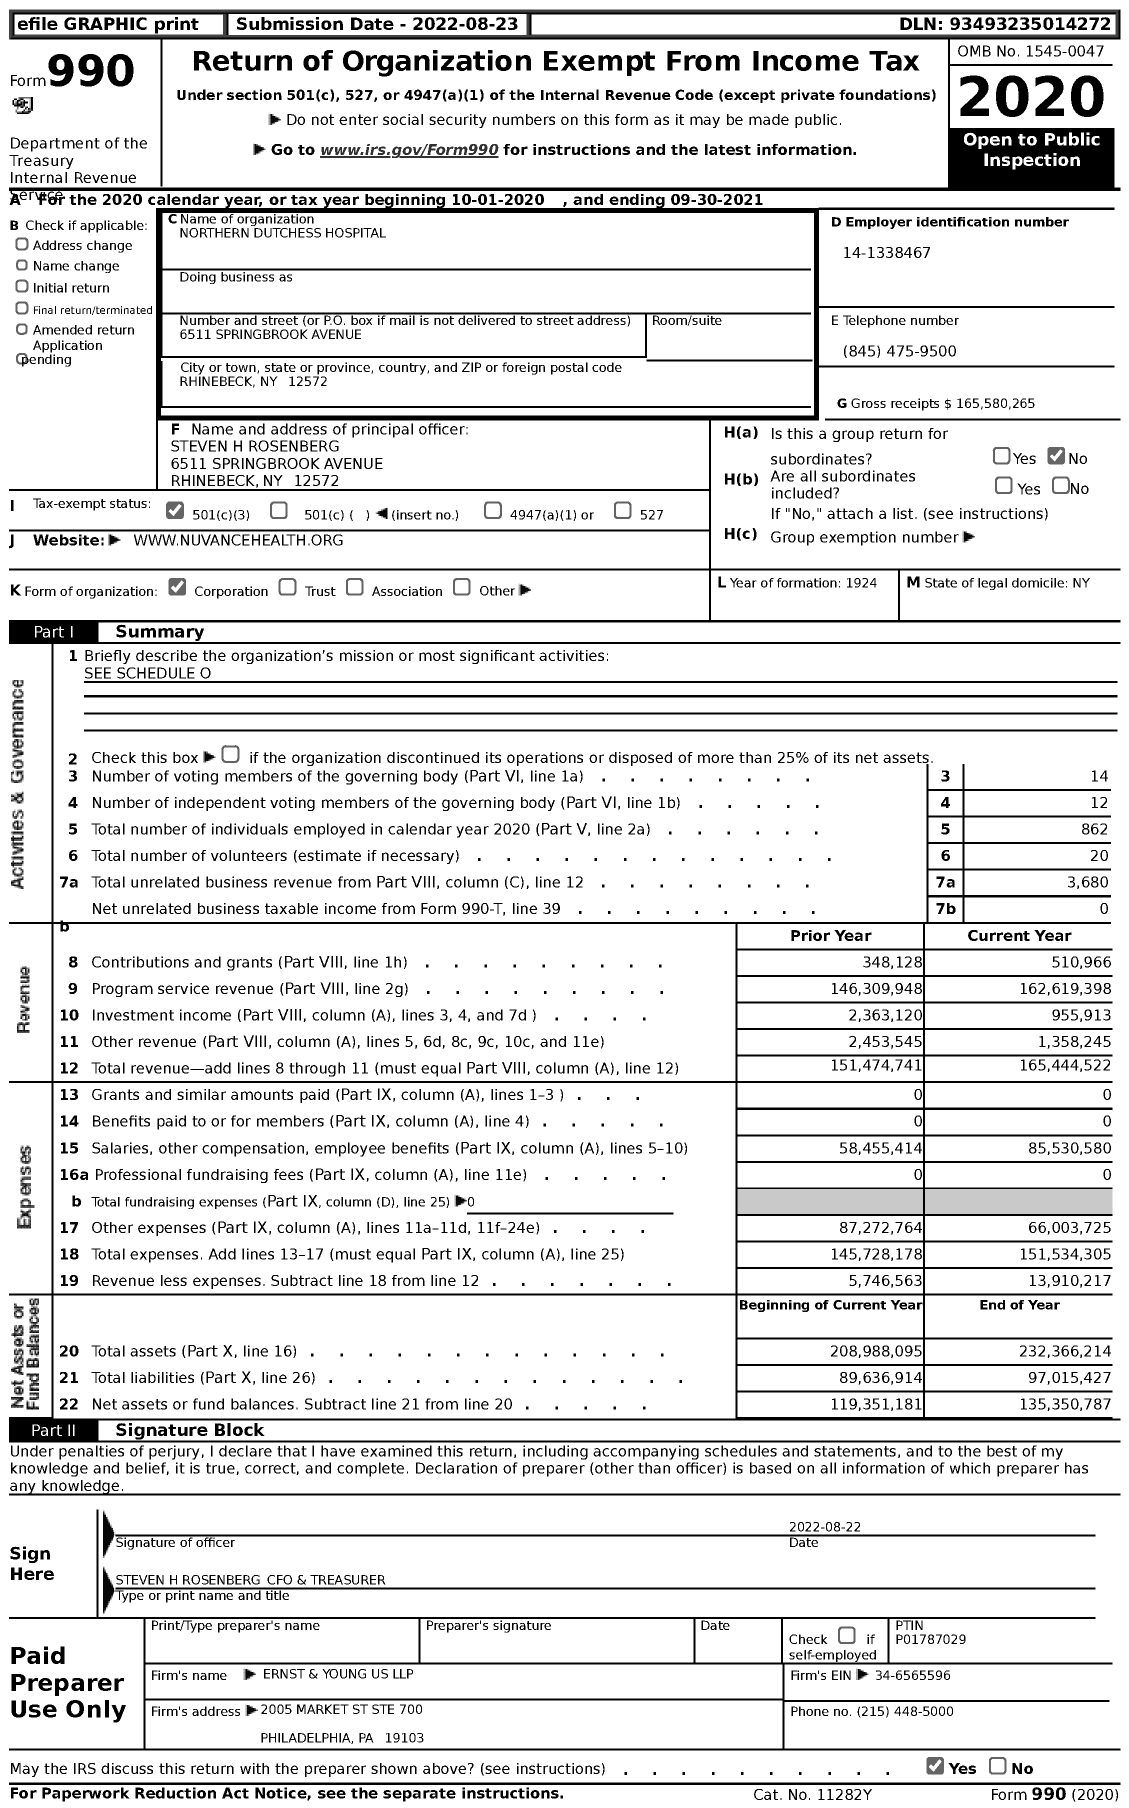 Image of first page of 2020 Form 990 for Northern Dutchess Hospital (NDH)